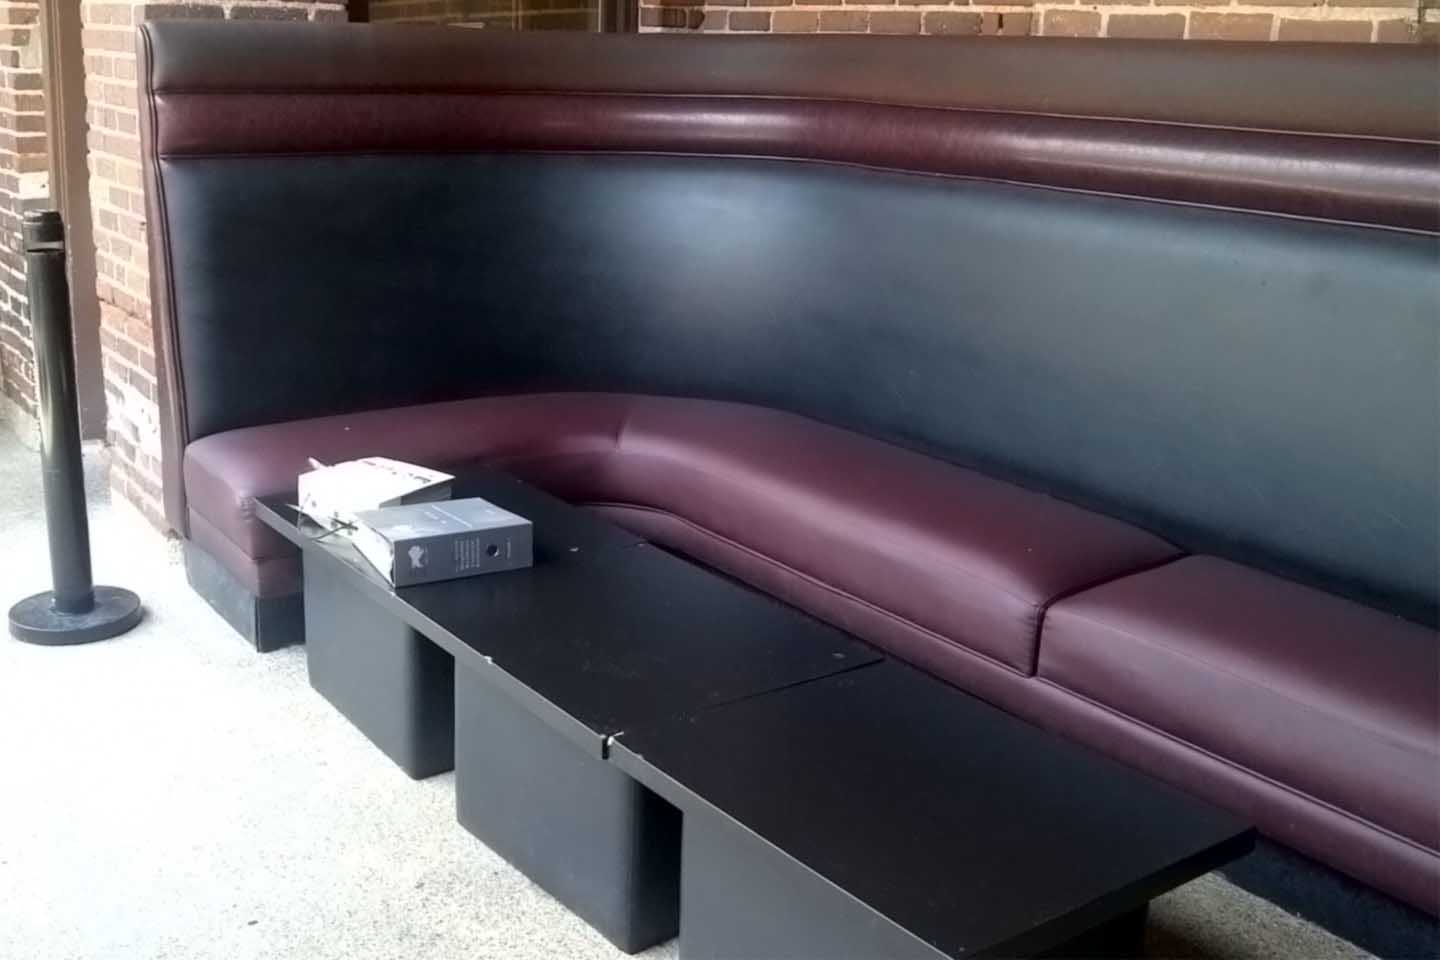 Restaurant seats upholstery Van Nuys California and commercial upholstery